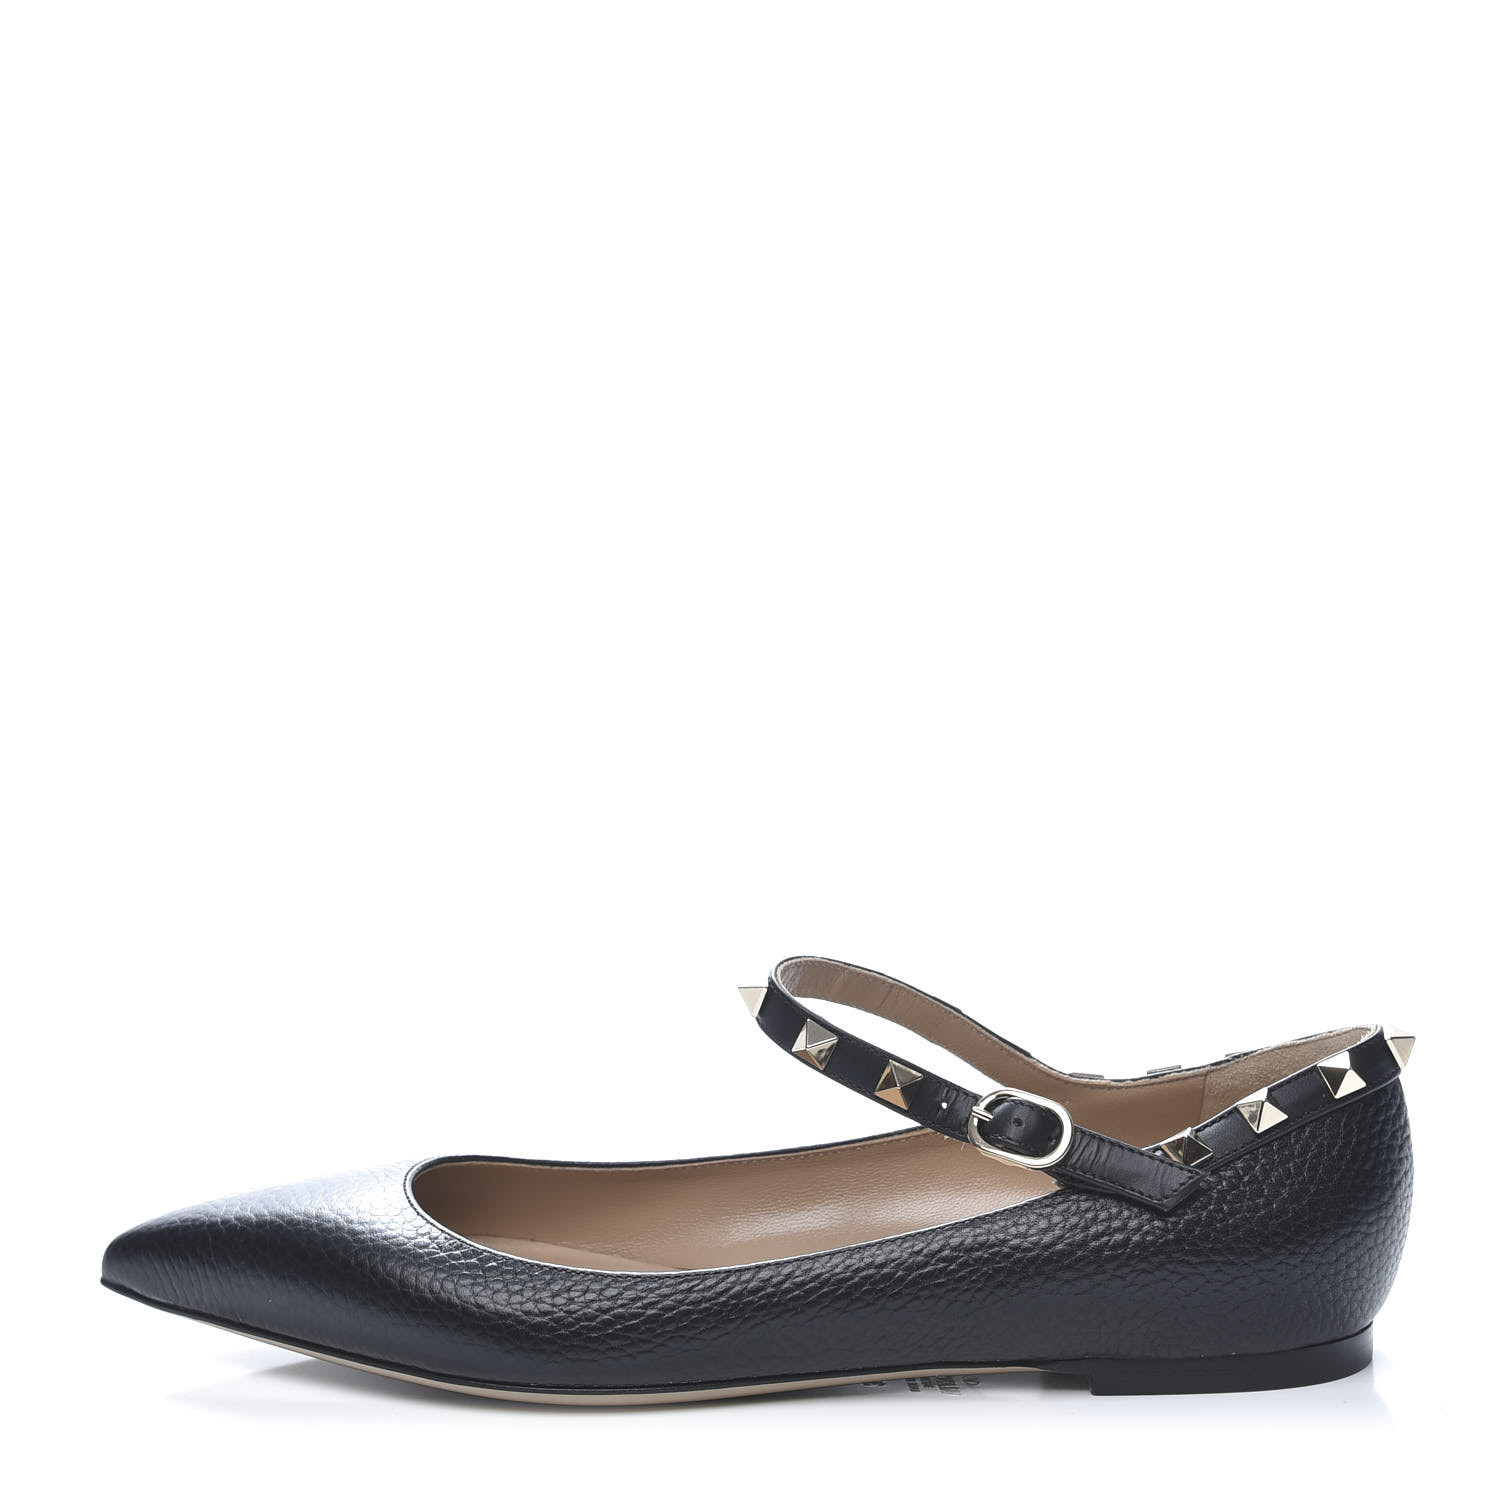 black ballerina shoes with ankle strap